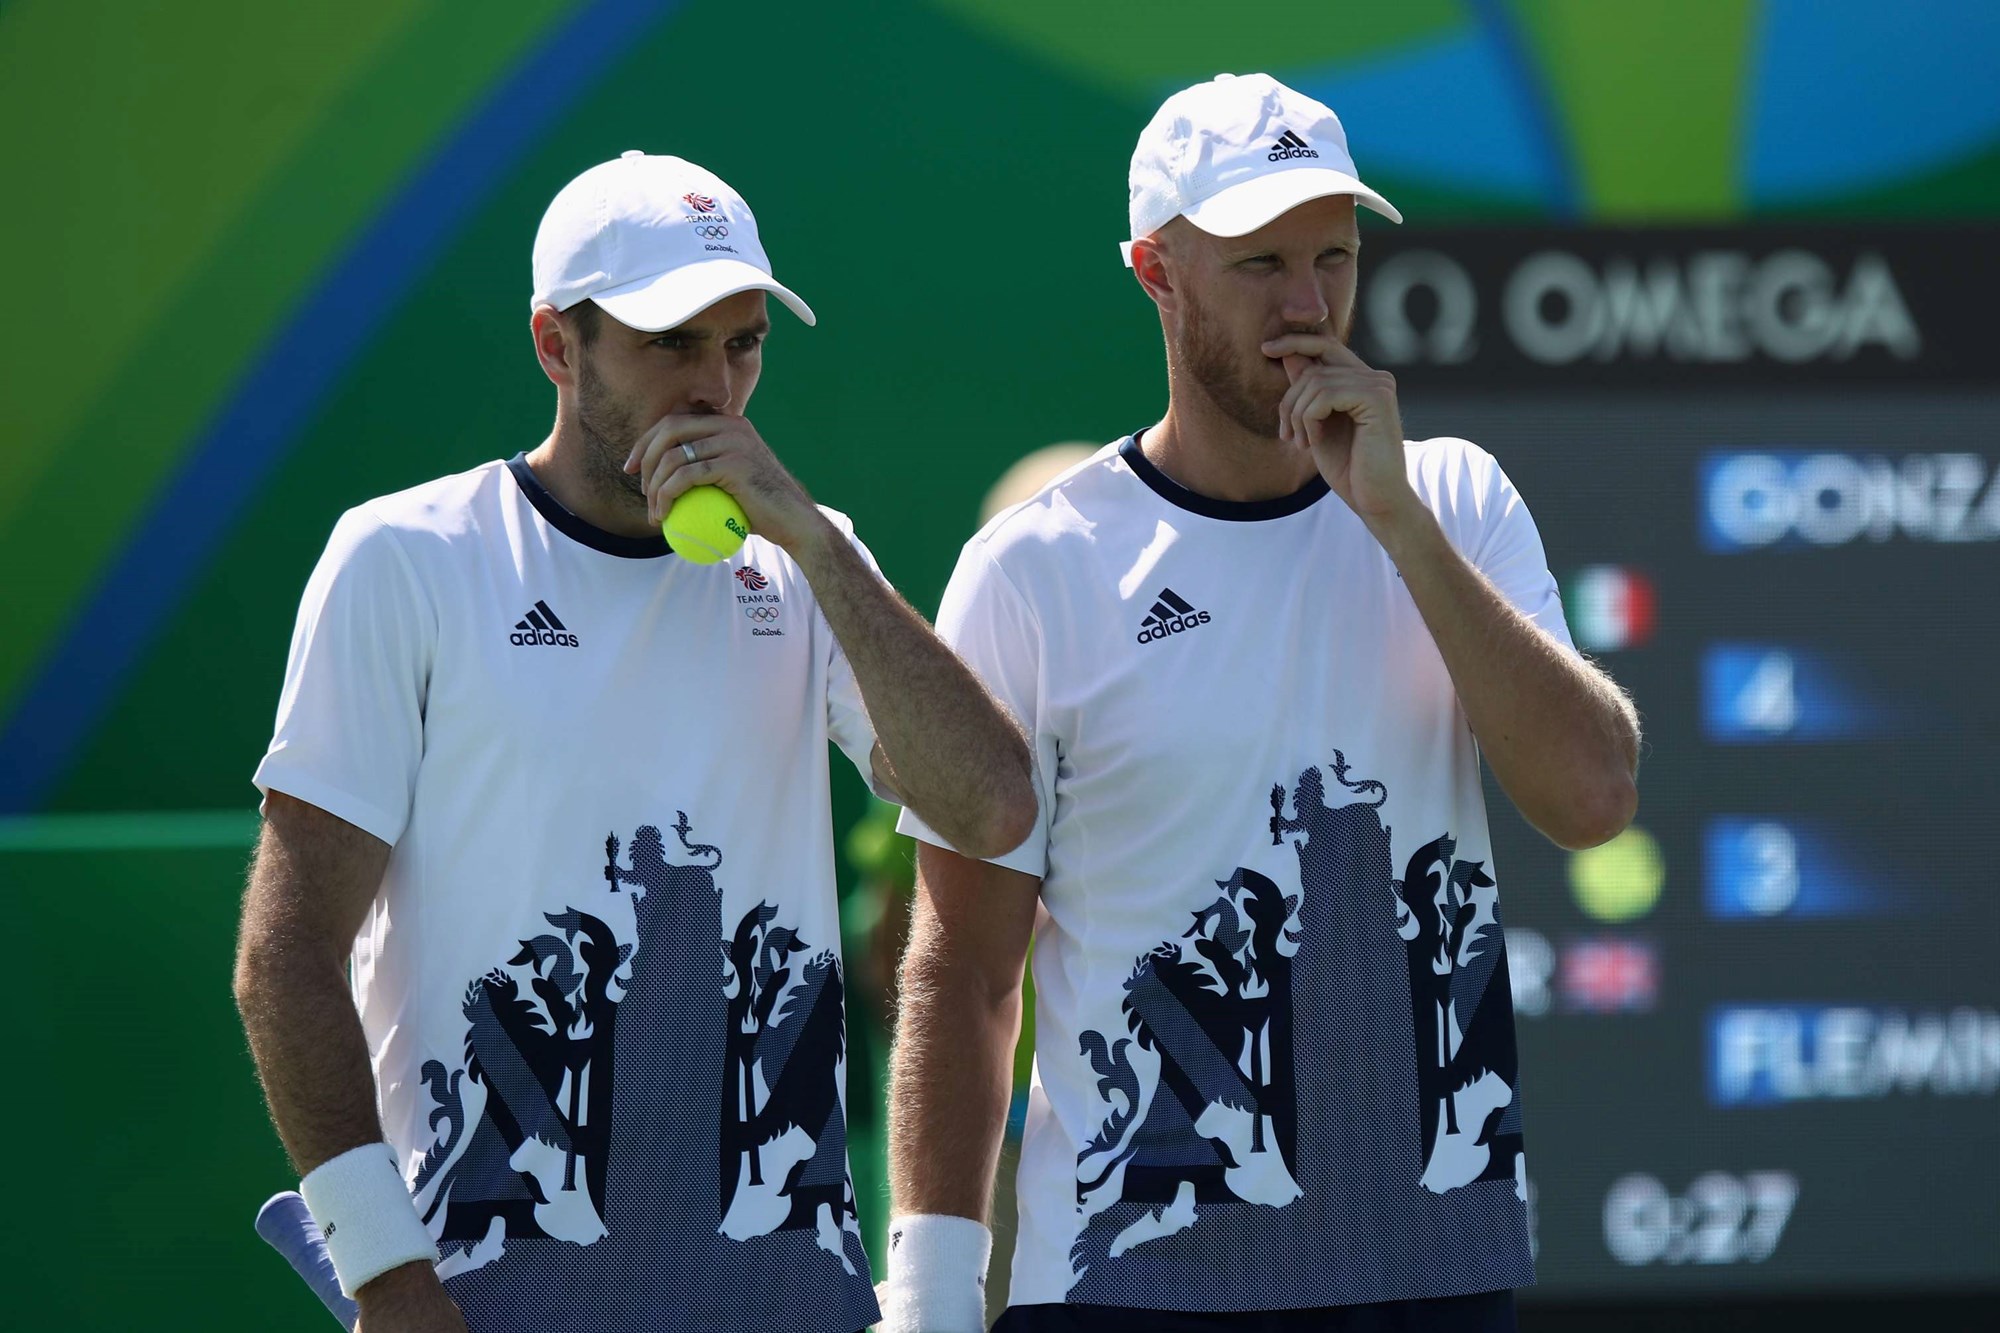 Dom Inglot and Colin Fleming representing Great Britain at the 2016 Rio Olympics